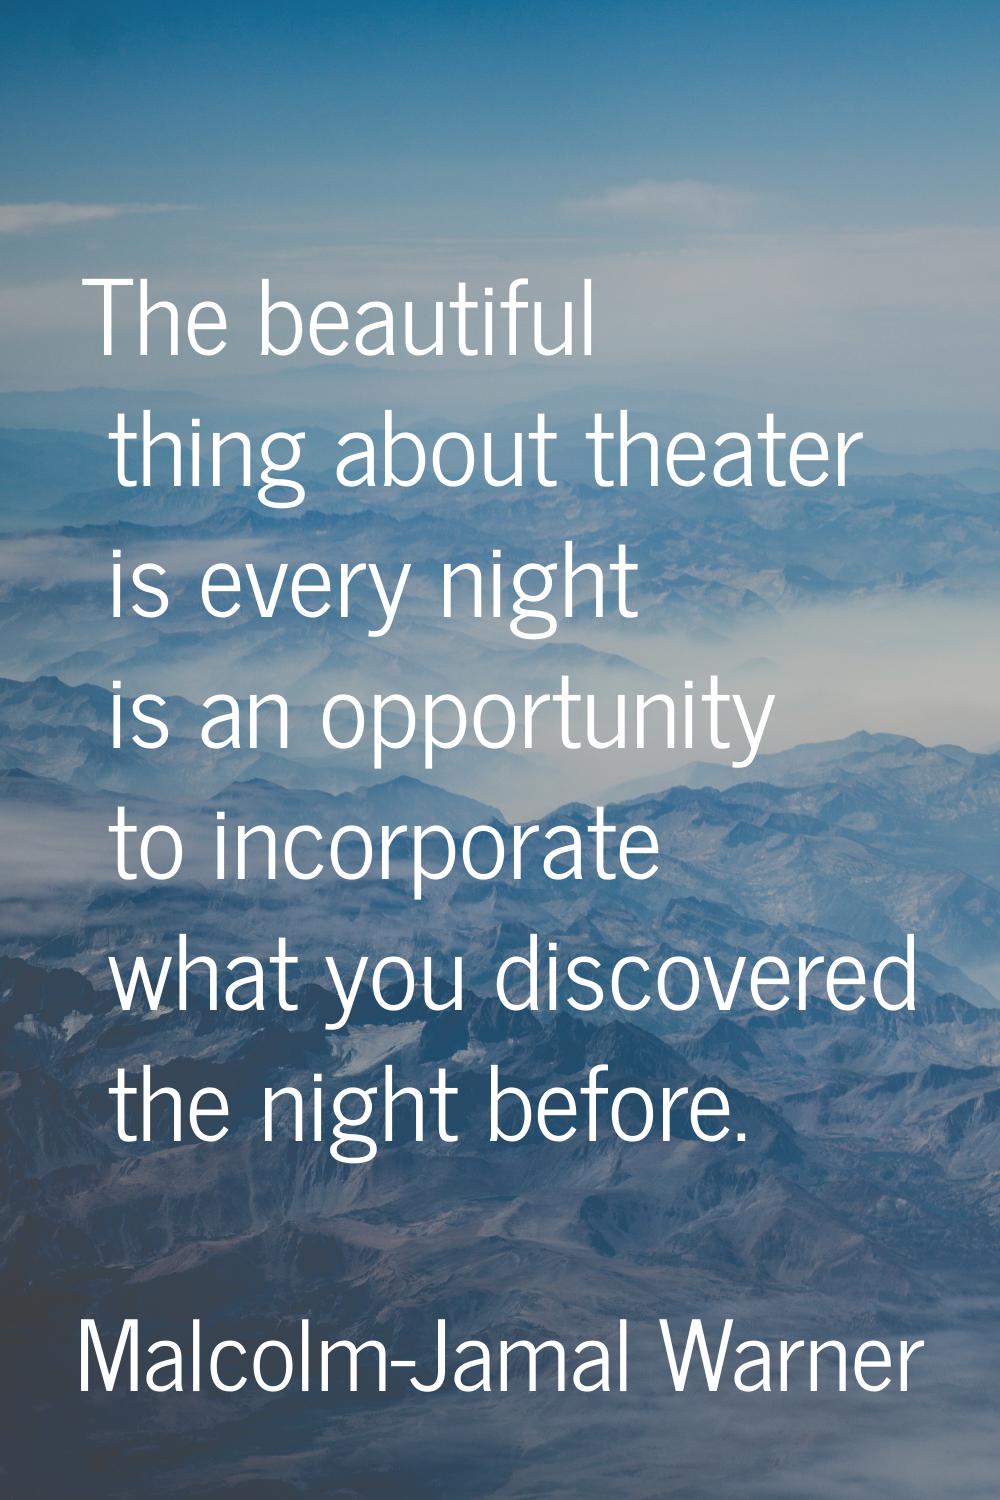 The beautiful thing about theater is every night is an opportunity to incorporate what you discover